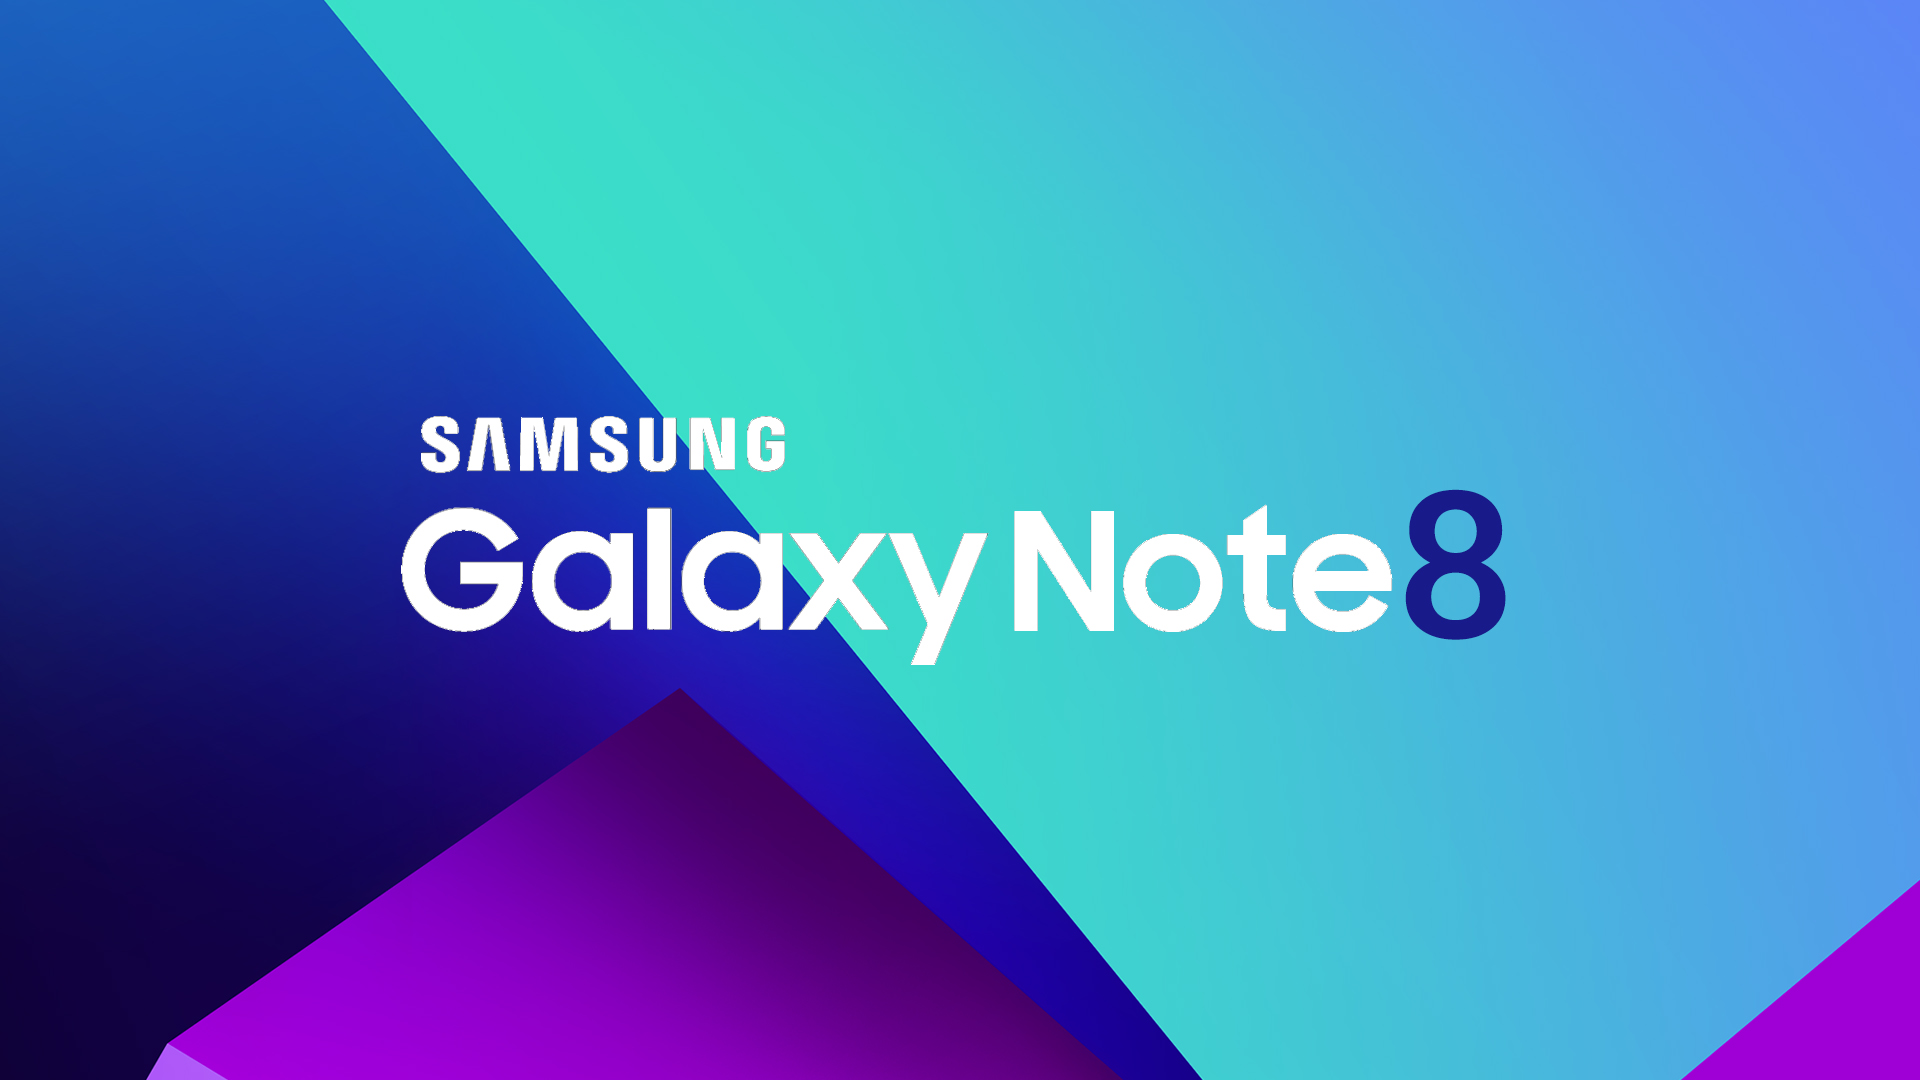 Samsung Galaxy Note 8 set to launch in late August